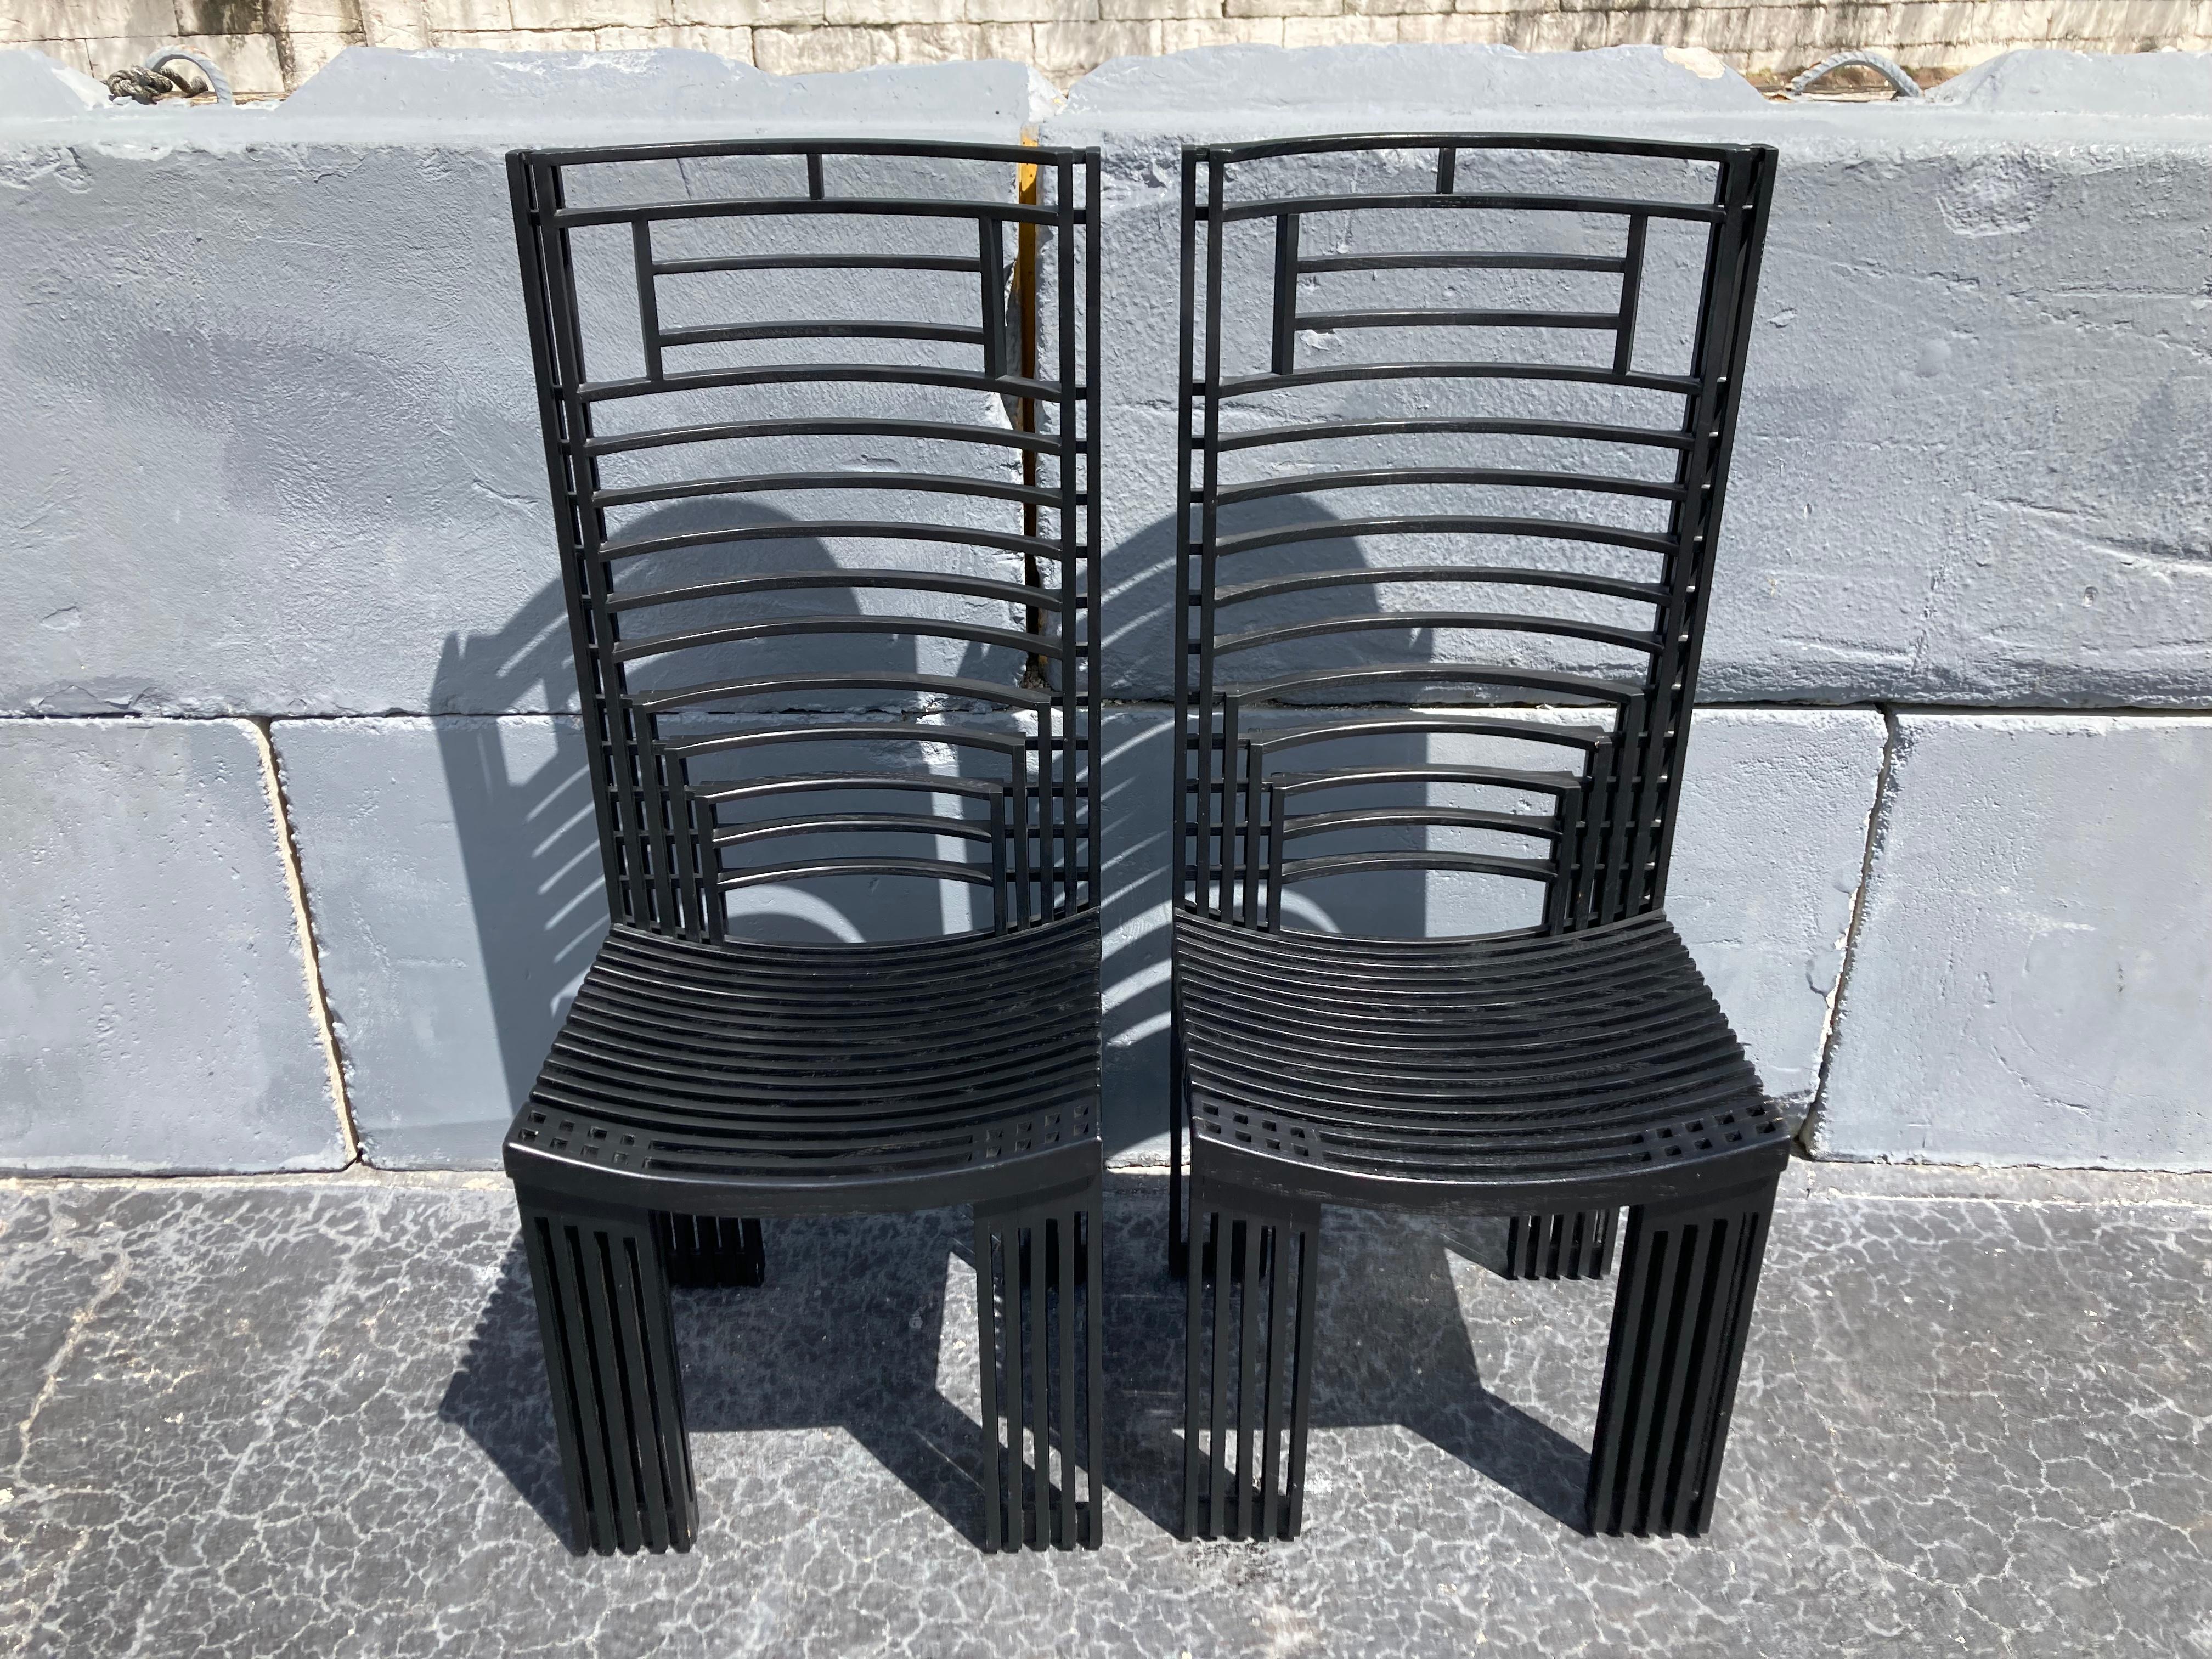 Black lacquered oak, complex chairs :)
The Peruvian architect designed these chairs for a house he build in 1988 in Coral Gables, Florida. Purchased from the original owner Richard Bermont. Price is per chair.
 